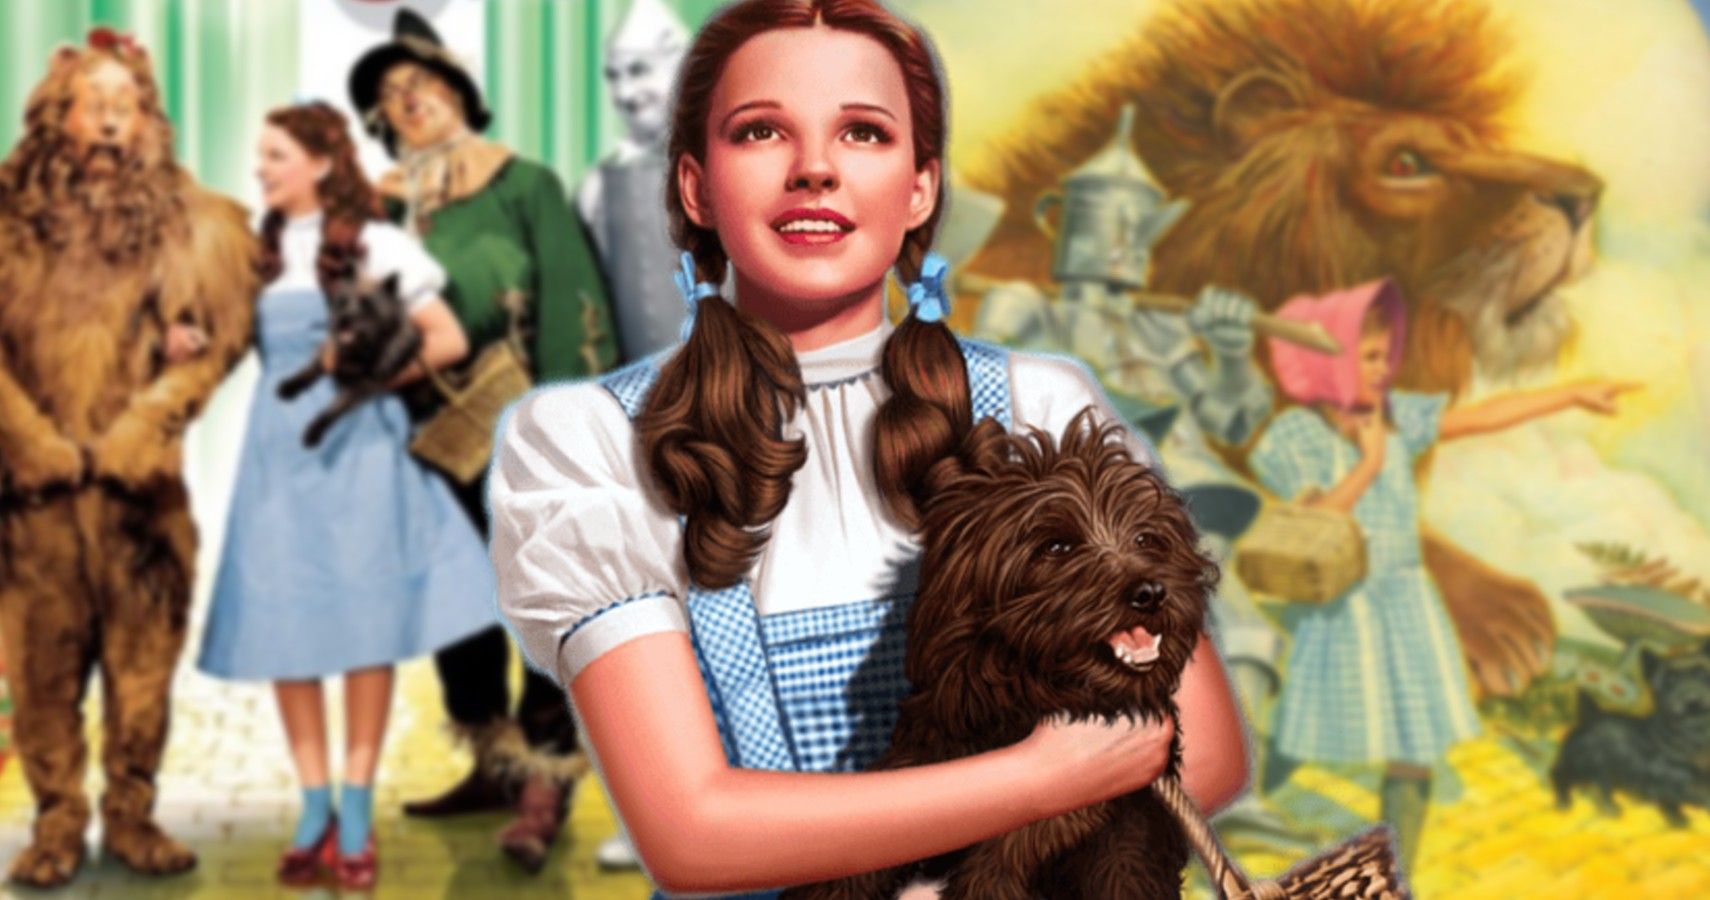 dorothy and wizard in oz series